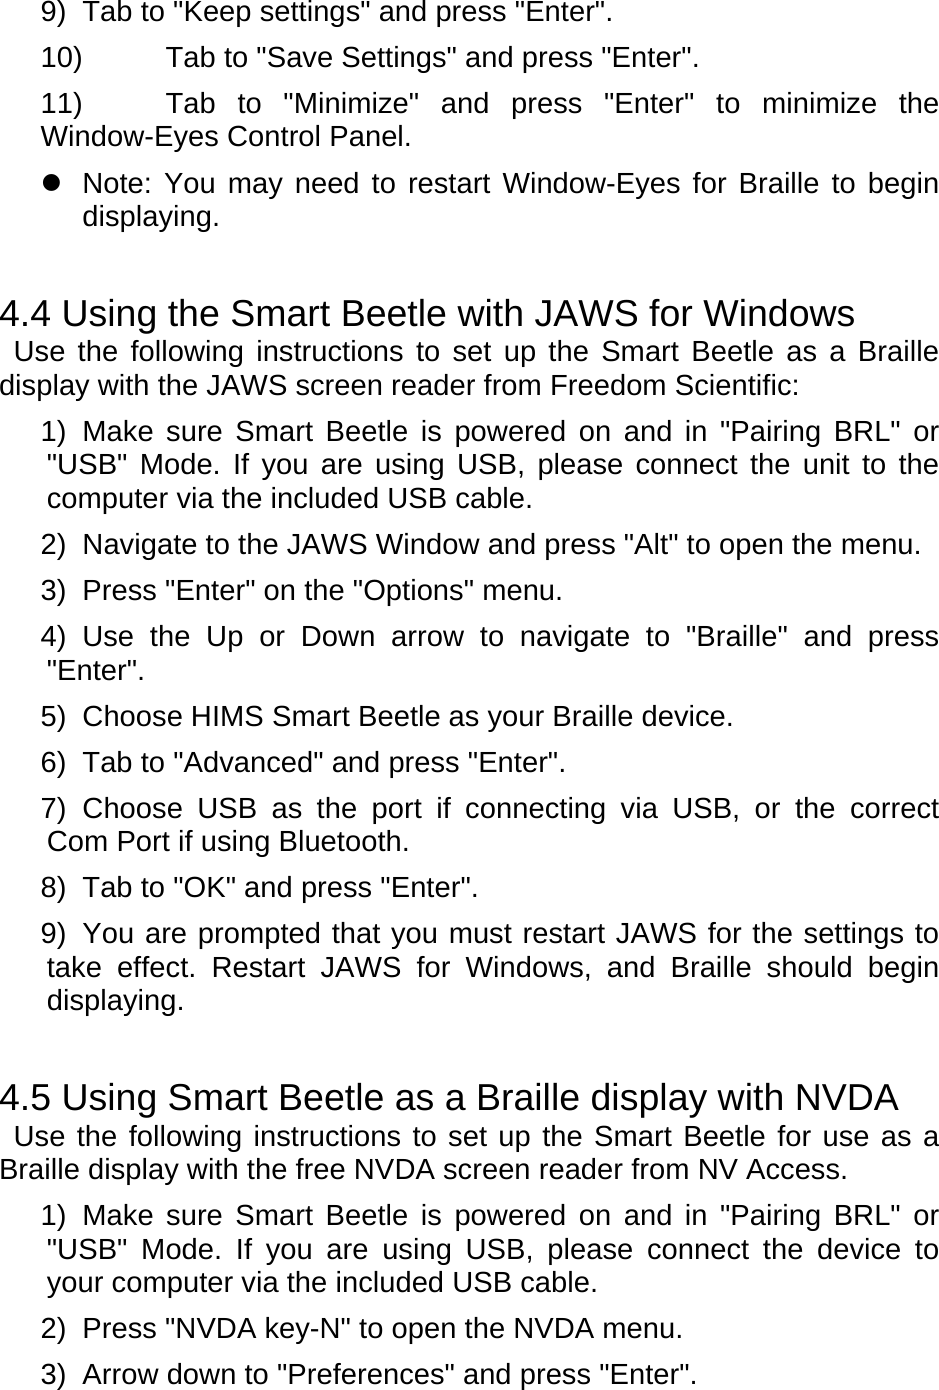 9)  Tab to &quot;Keep settings&quot; and press &quot;Enter&quot;. 10)  Tab to &quot;Save Settings&quot; and press &quot;Enter&quot;. 11)  Tab to &quot;Minimize&quot; and press &quot;Enter&quot; to minimize the Window-Eyes Control Panel.     Note: You may need to restart Window-Eyes for Braille to begin displaying.  4.4 Using the Smart Beetle with JAWS for Windows  Use the following instructions to set up the Smart Beetle as a Braille display with the JAWS screen reader from Freedom Scientific: 1) Make sure Smart Beetle is powered on and in &quot;Pairing BRL&quot; or &quot;USB&quot; Mode. If you are using USB, please connect the unit to the computer via the included USB cable.   2)  Navigate to the JAWS Window and press &quot;Alt&quot; to open the menu.   3) Press &quot;Enter&quot; on the &quot;Options&quot; menu. 4) Use the Up or Down arrow to navigate to &quot;Braille&quot; and press &quot;Enter&quot;. 5) Choose HIMS Smart Beetle as your Braille device. 6)  Tab to &quot;Advanced&quot; and press &quot;Enter&quot;. 7) Choose USB as the port if connecting via USB, or the correct Com Port if using Bluetooth. 8)  Tab to &quot;OK&quot; and press &quot;Enter&quot;. 9)  You are prompted that you must restart JAWS for the settings to take effect. Restart JAWS for Windows, and Braille should begin displaying.  4.5 Using Smart Beetle as a Braille display with NVDA  Use the following instructions to set up the Smart Beetle for use as a Braille display with the free NVDA screen reader from NV Access. 1) Make sure Smart Beetle is powered on and in &quot;Pairing BRL&quot; or &quot;USB&quot; Mode. If you are using USB, please connect the device to your computer via the included USB cable. 2)  Press &quot;NVDA key-N&quot; to open the NVDA menu. 3)  Arrow down to &quot;Preferences&quot; and press &quot;Enter&quot;. 